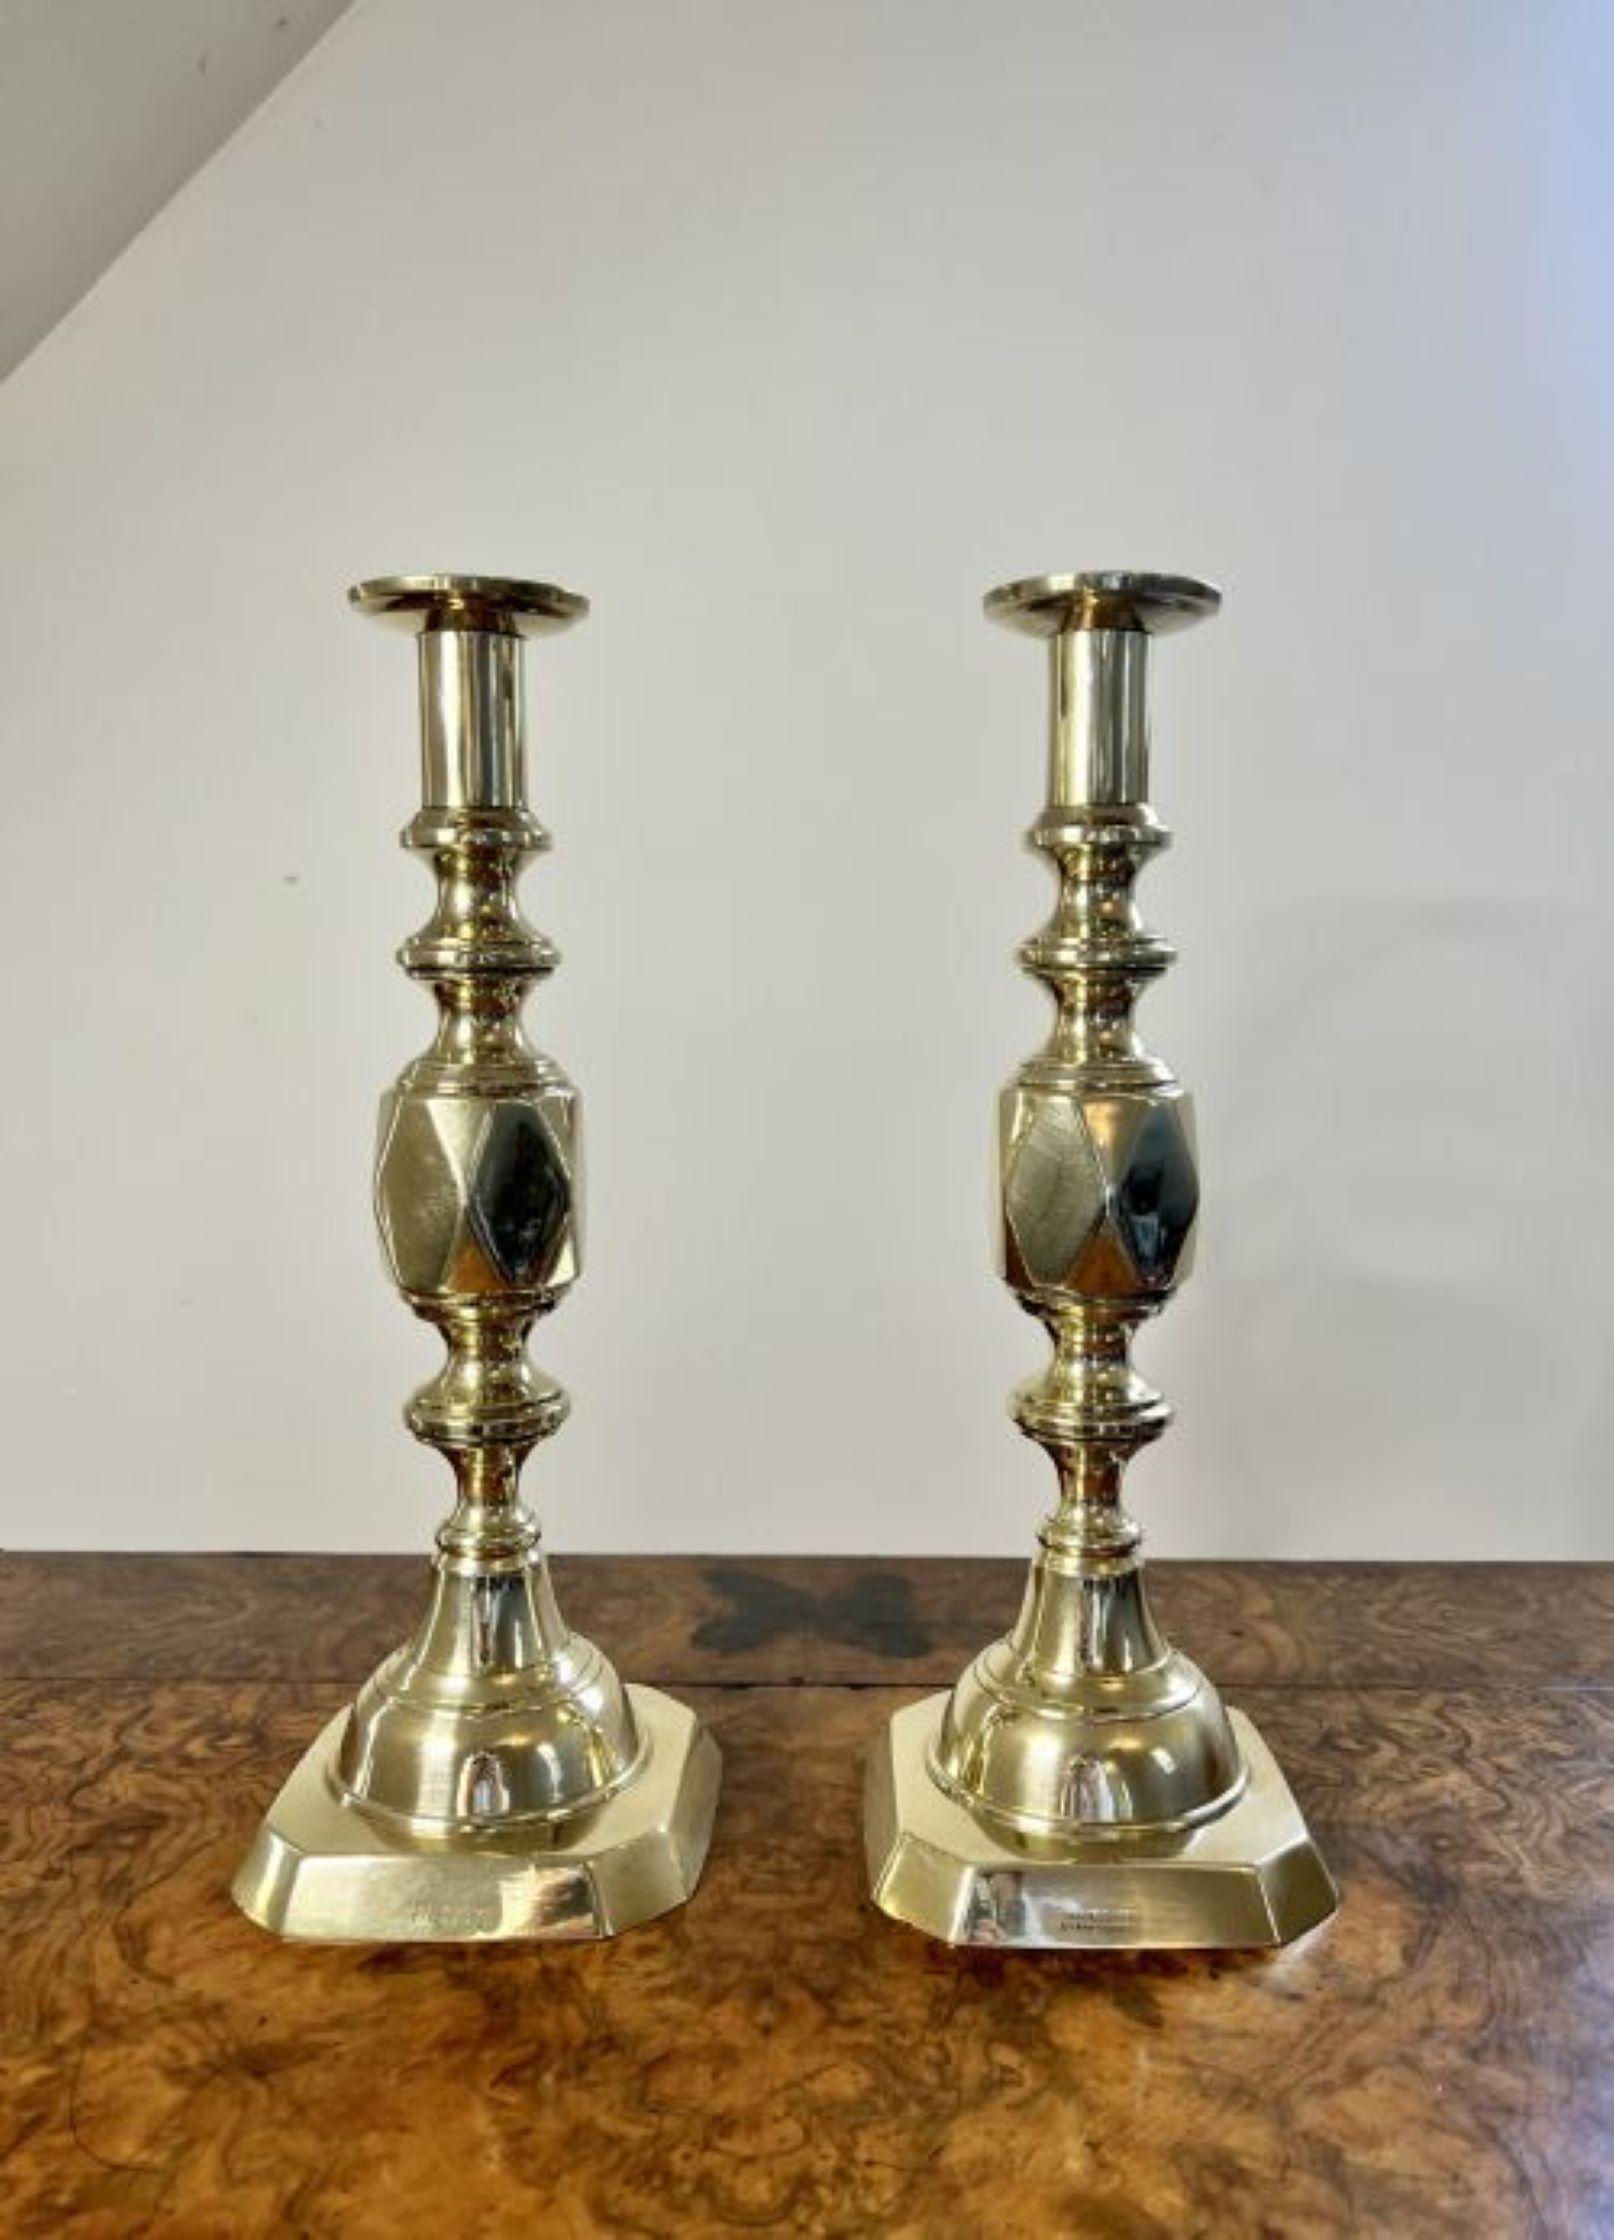 Large pair of antique Victorian quality brass ace of diamonds candlesticks having a quality pair of large antique Victorian brass candlesticks with 'THE ACE OF DIAMONDS' stamped to the front edge.